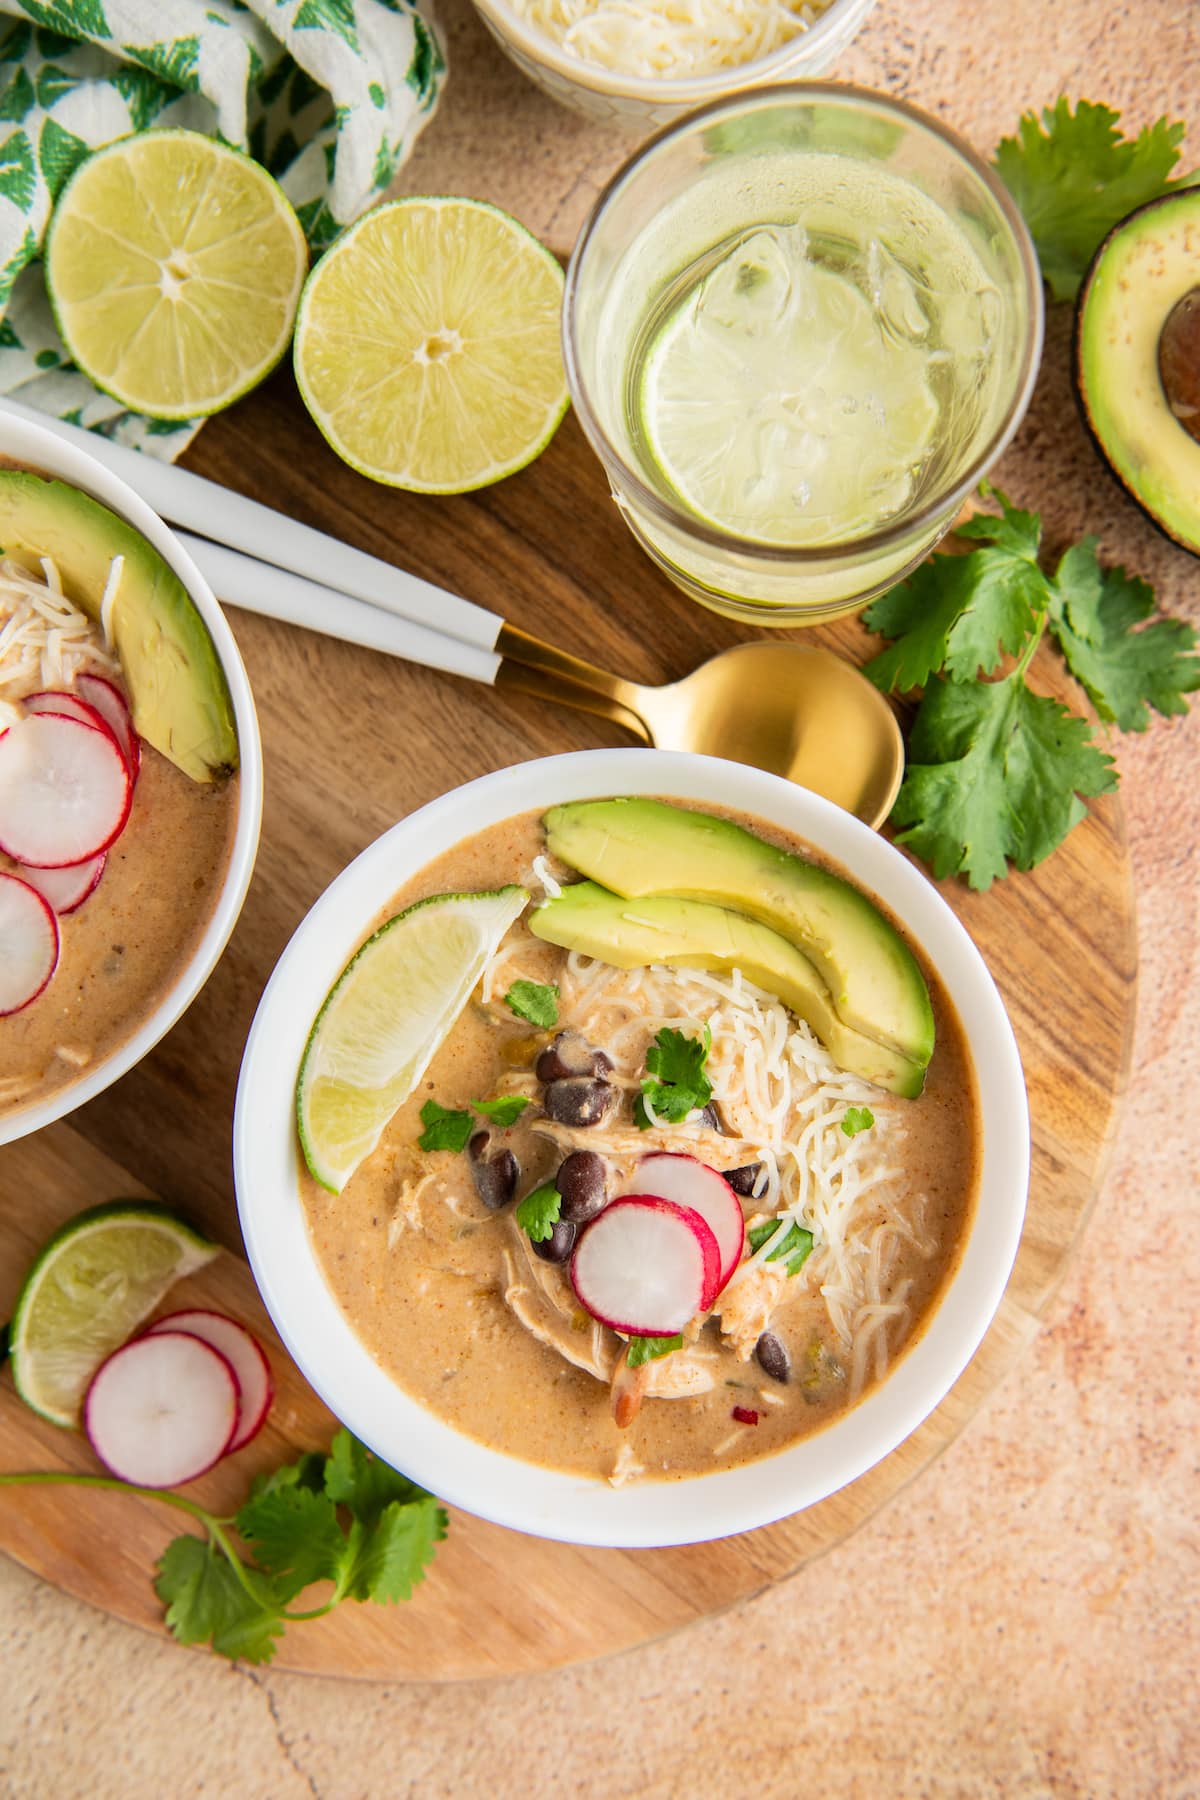 Overhead view of a bowl of crock pot chicken enchilada soup topped with avocado, radish, lime, and cilantro, next to another bowl, a lime cut in half, sliced radishes, fresh cilantro, and a glass of water.